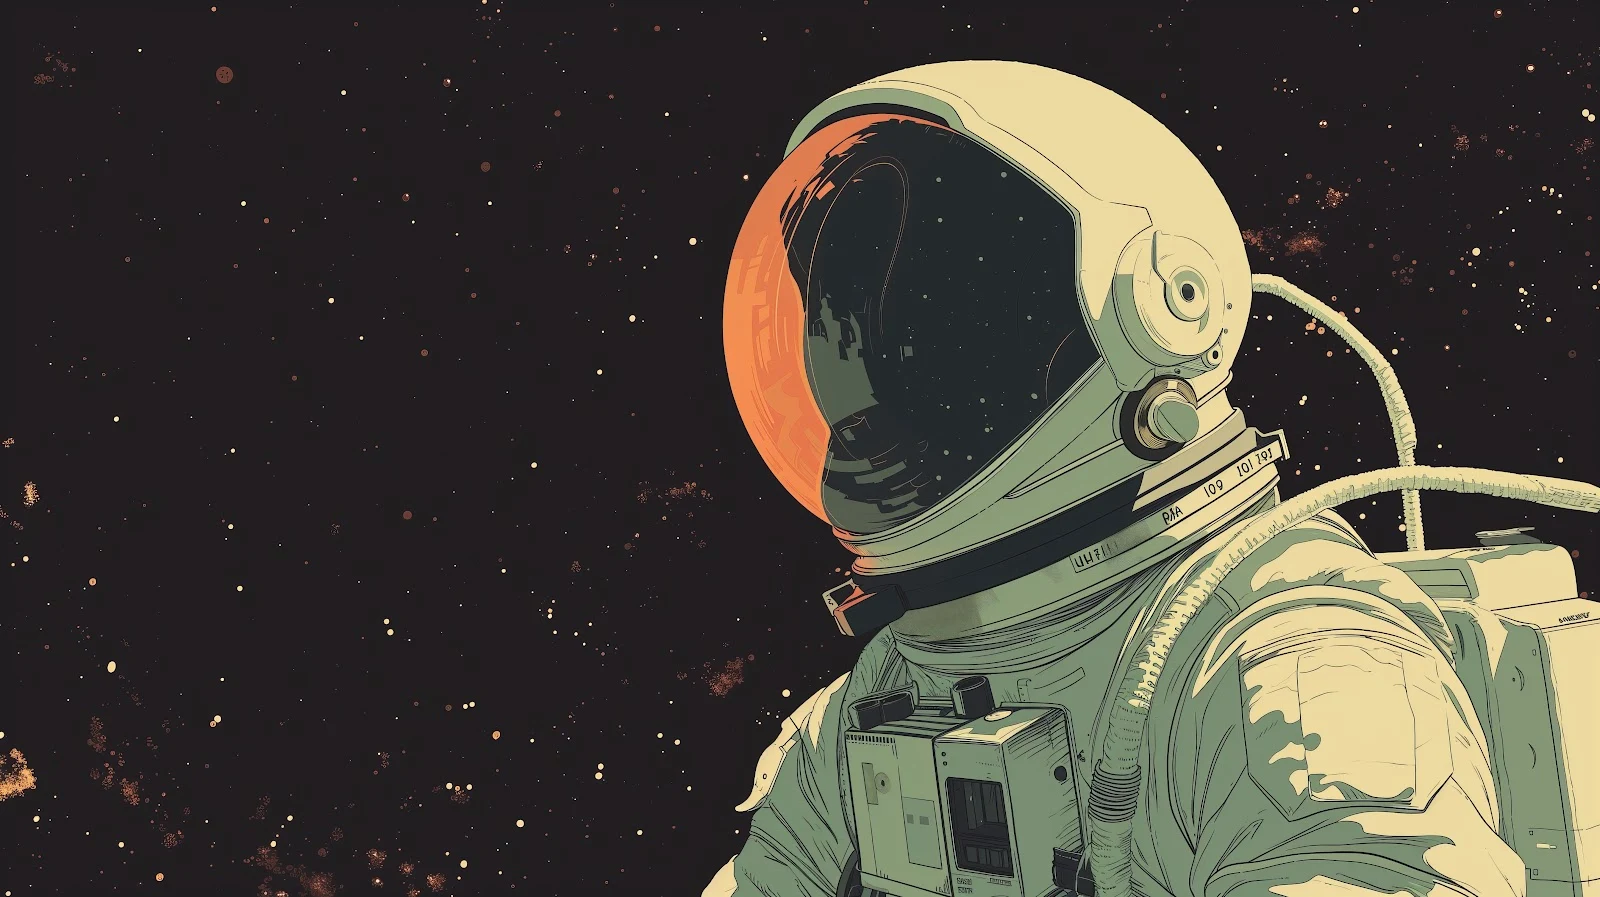 A Stunning Ai Art, Illustration, Space, Astronaut 5K Desktop and Mobile Wallpaper Background (5824x3264)